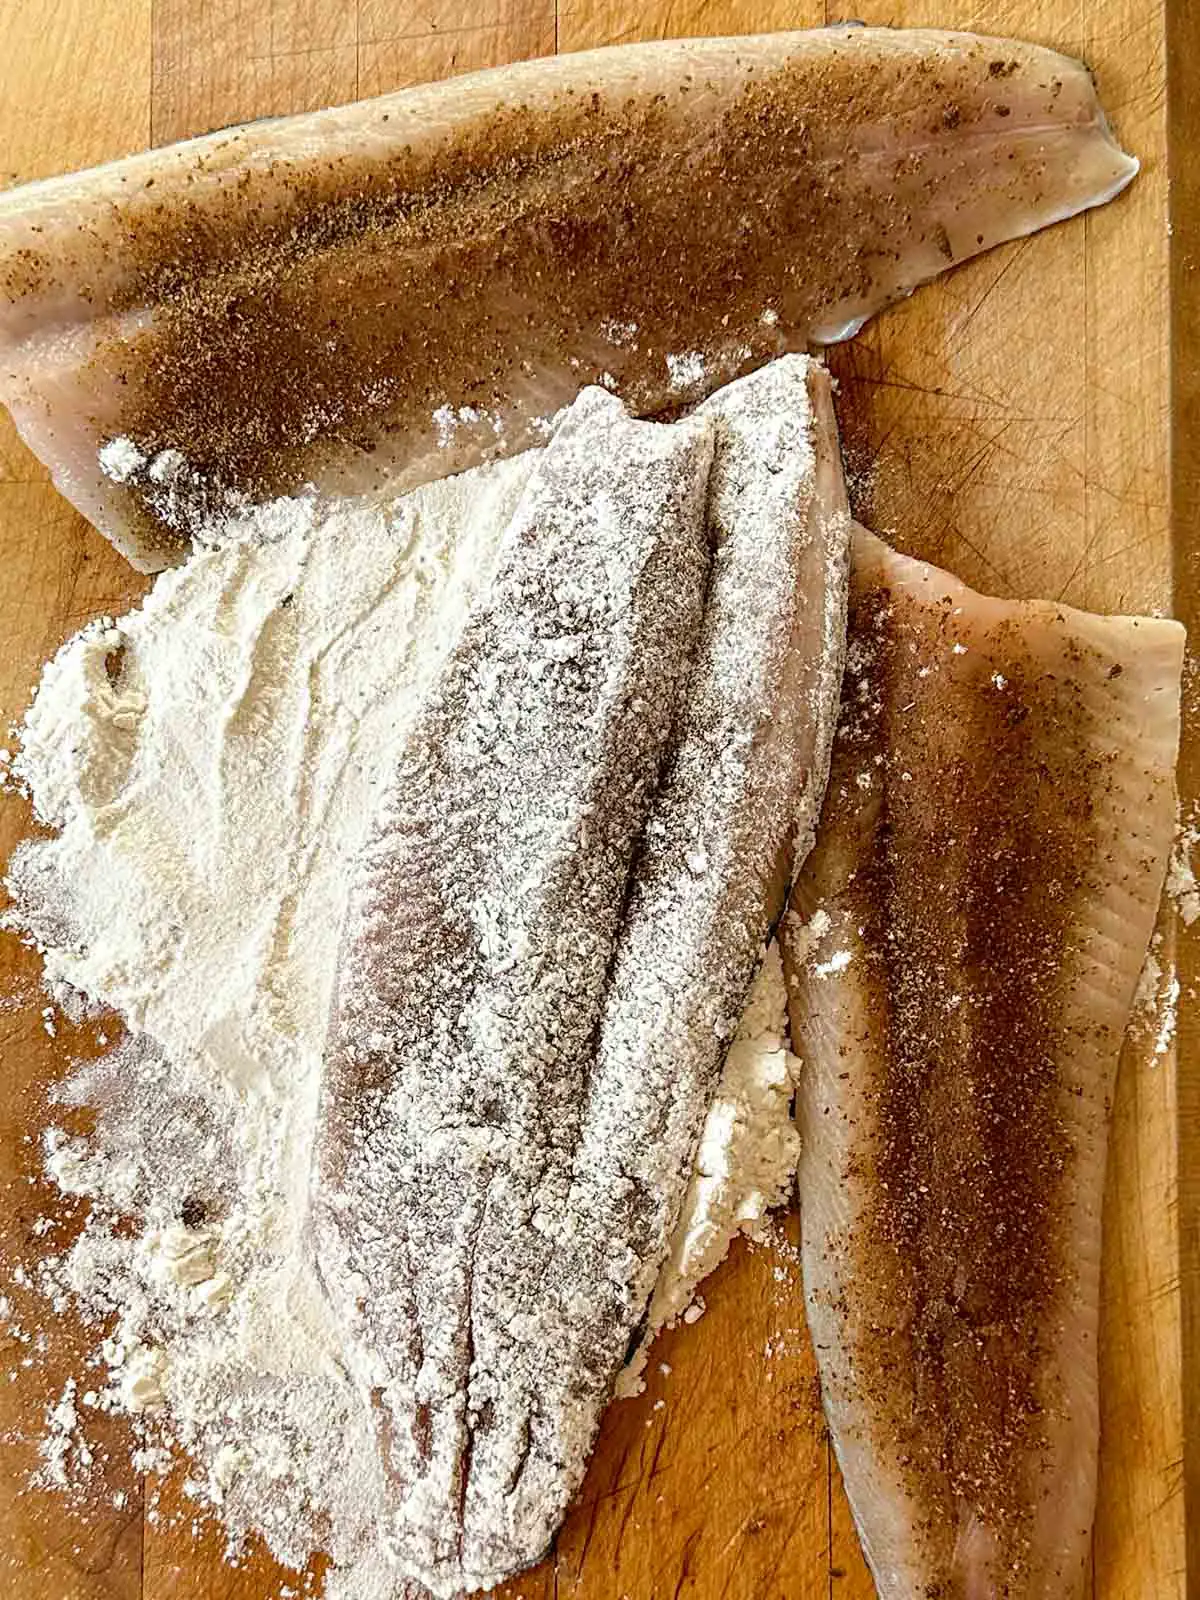 Seasoned rainbow trout fillets with one fillet coated with all purpose flour.